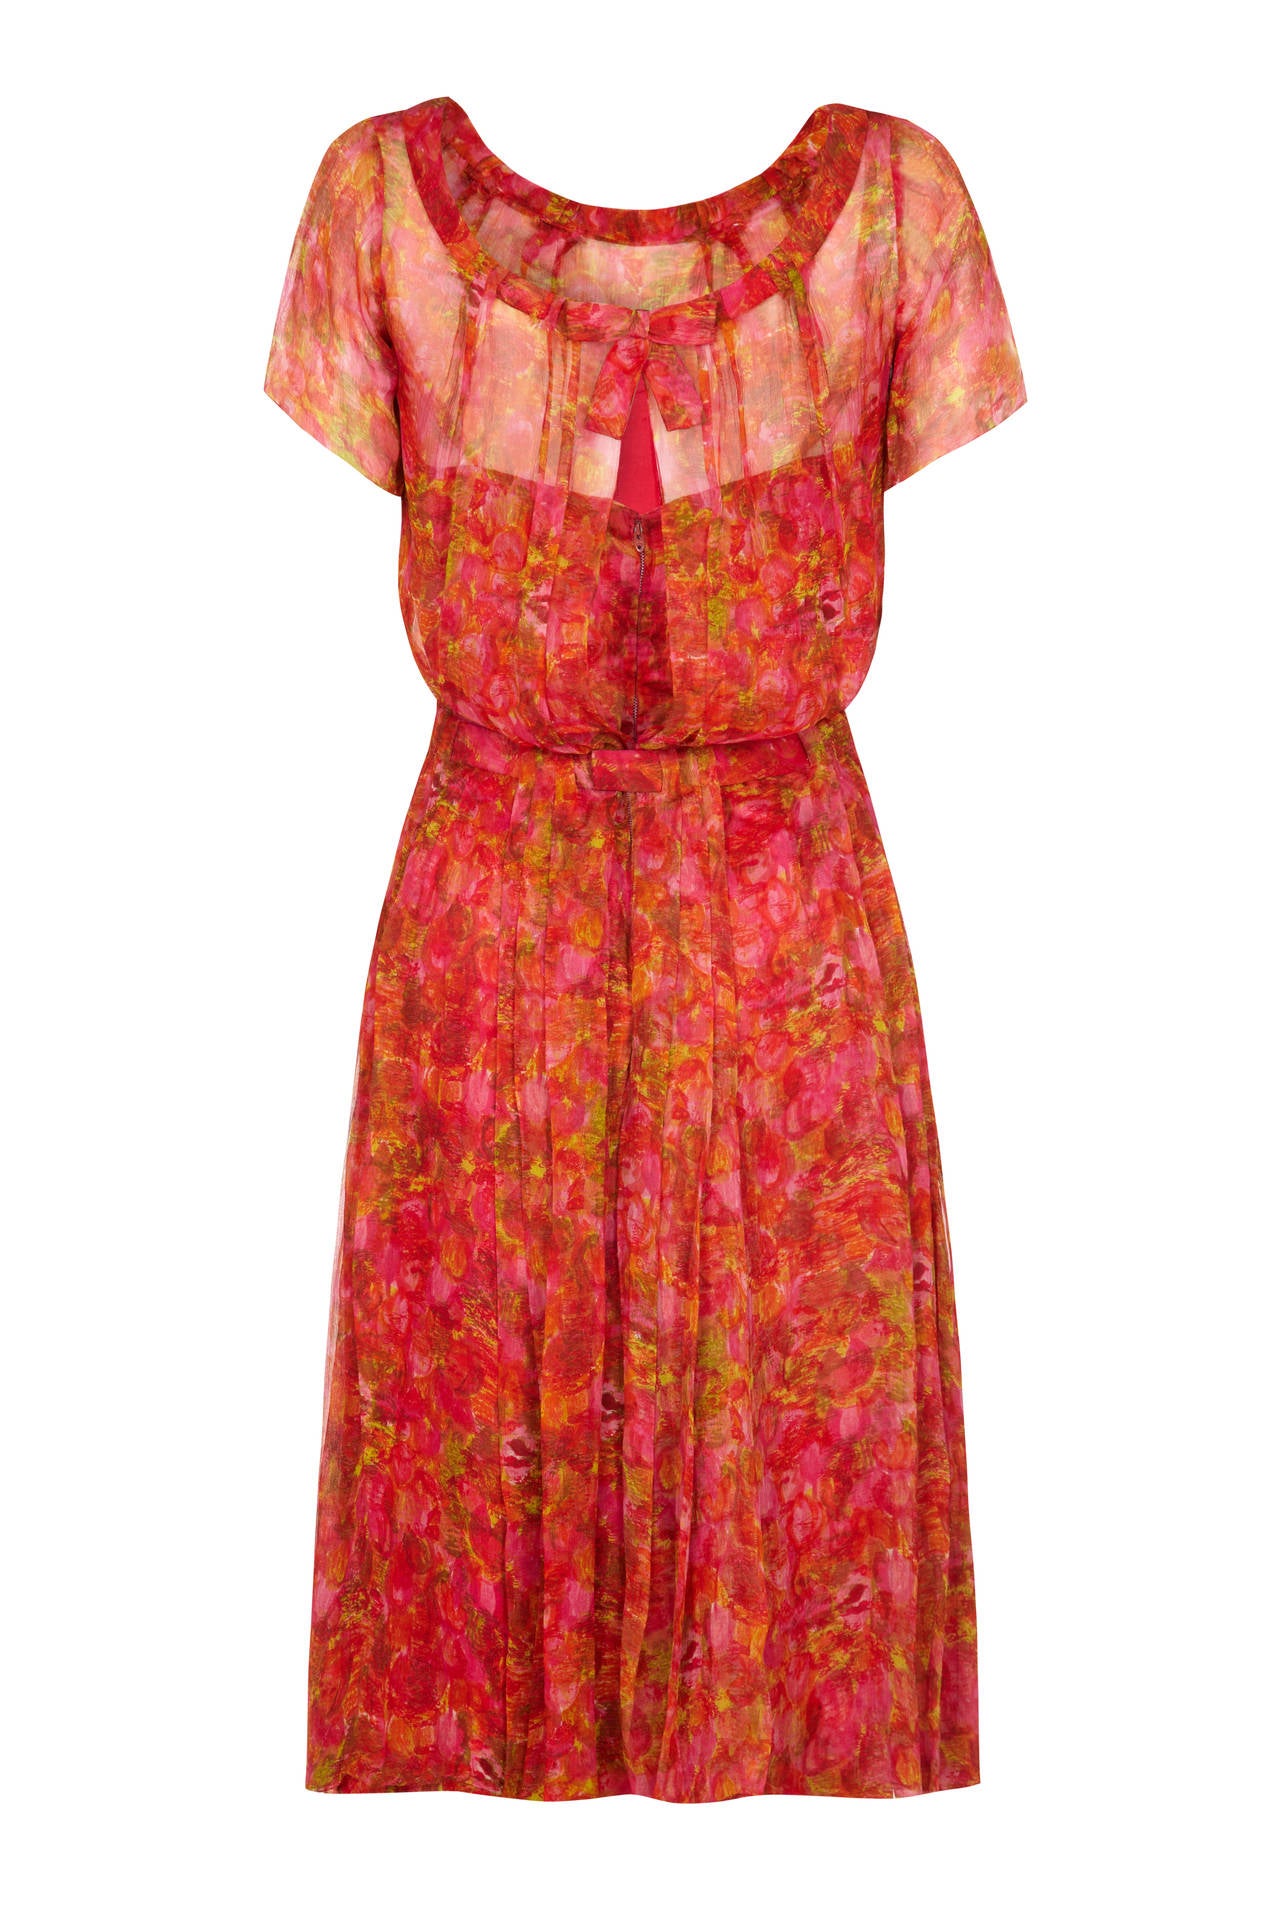 This absolutely exquisite 1950s dress in soft crimson, pink, green and orange printed silk chiffon is from English label Lachasse and is of excellent quality with superb couture construction. Although we can not be certain of the designer it is most